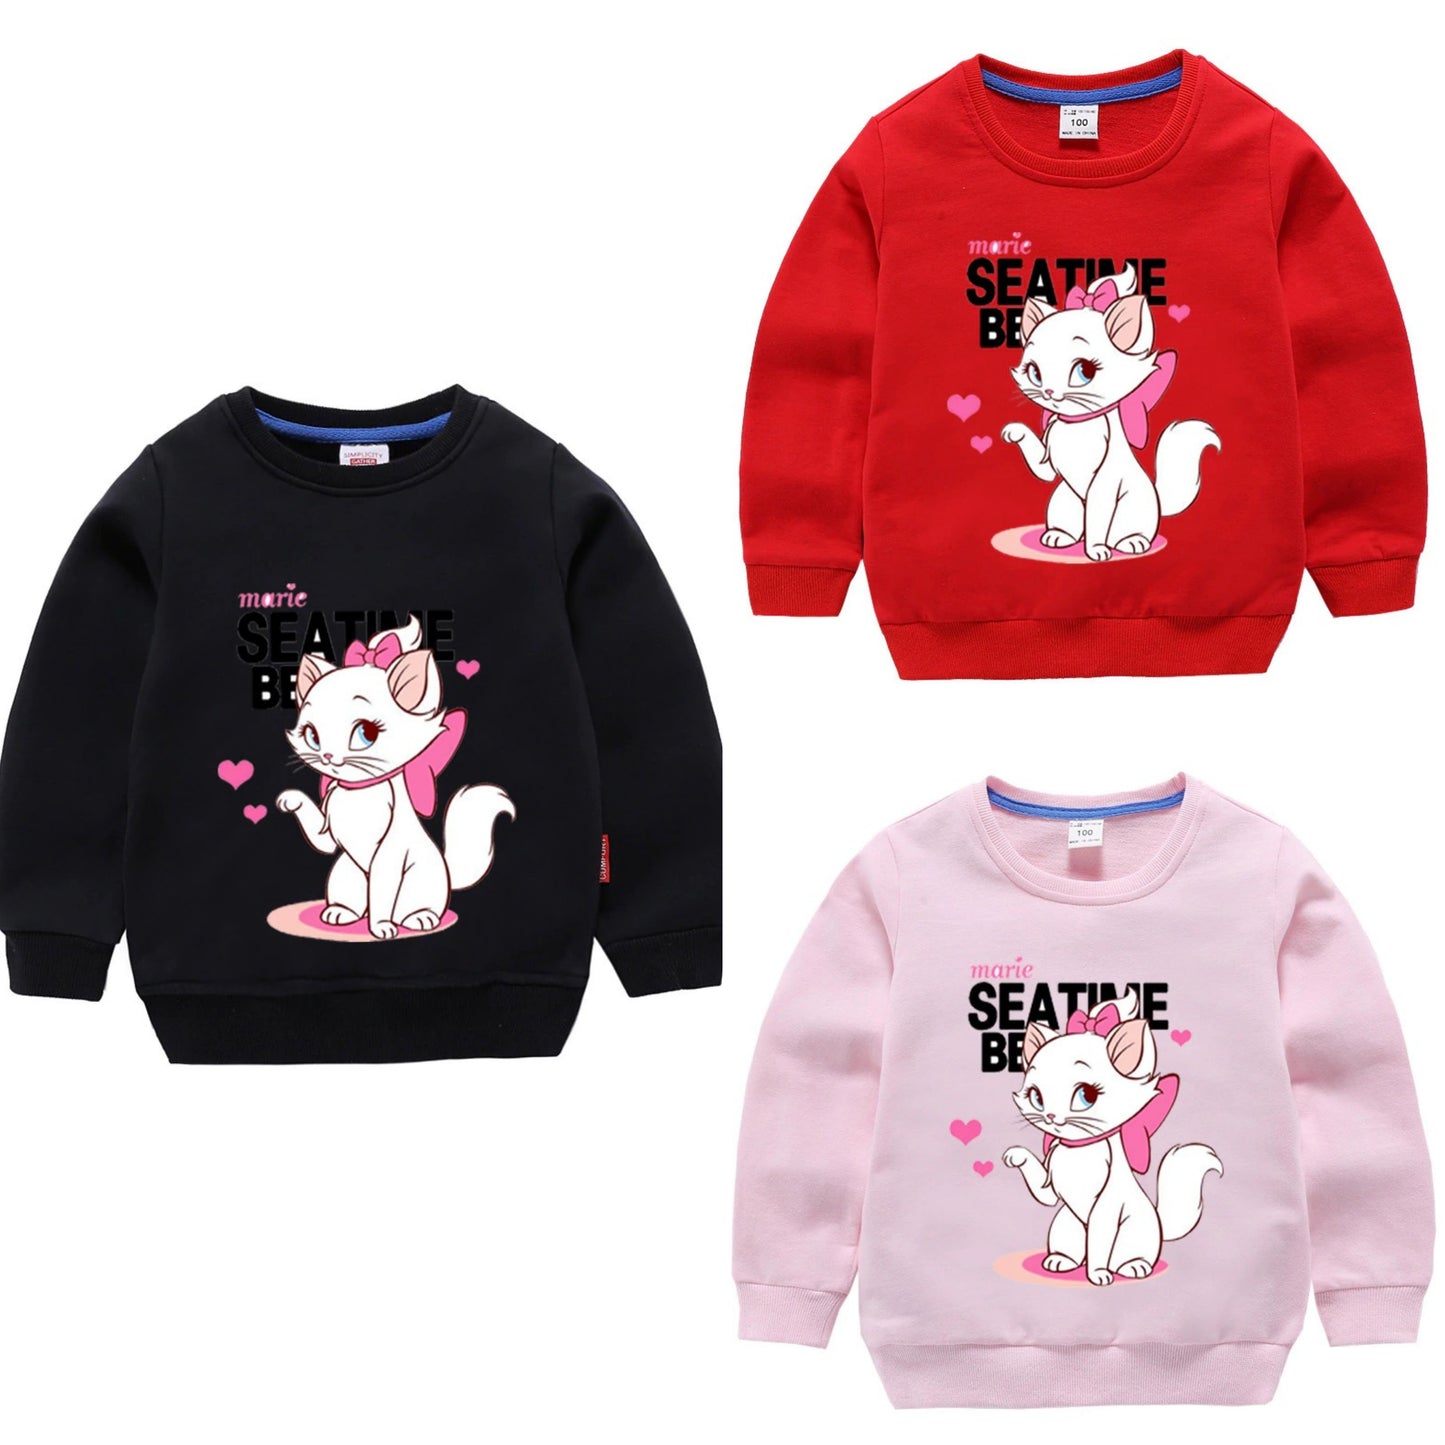 PACK OF 3 PRINTED KIDS SWEAT SHIRTS FOR GIRLS (Print 203)